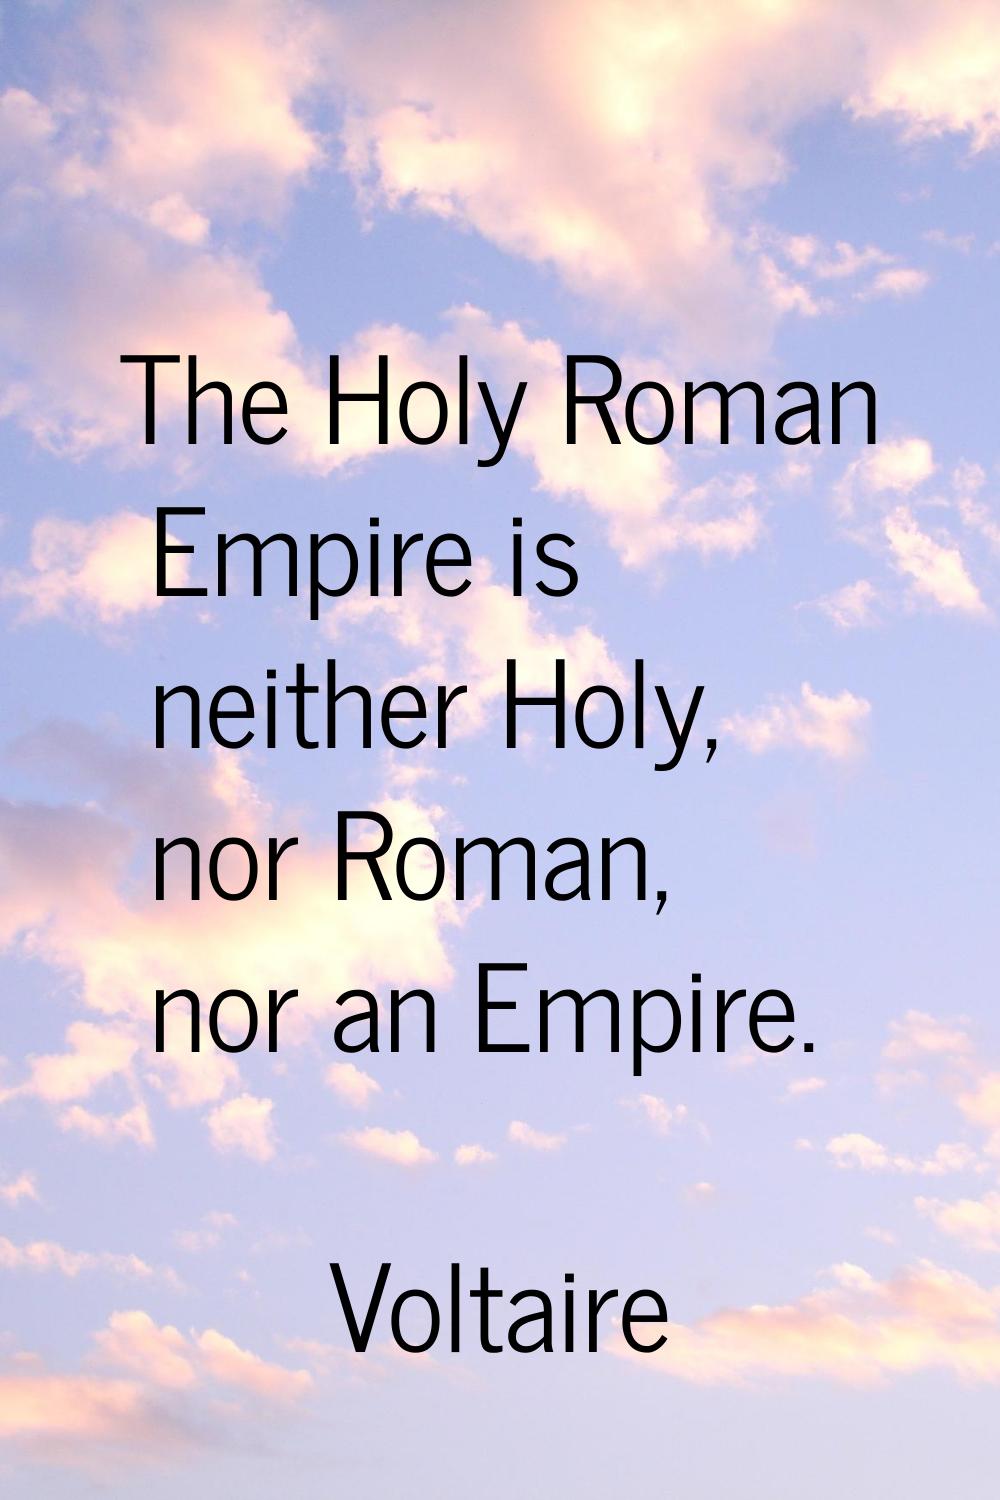 The Holy Roman Empire is neither Holy, nor Roman, nor an Empire.